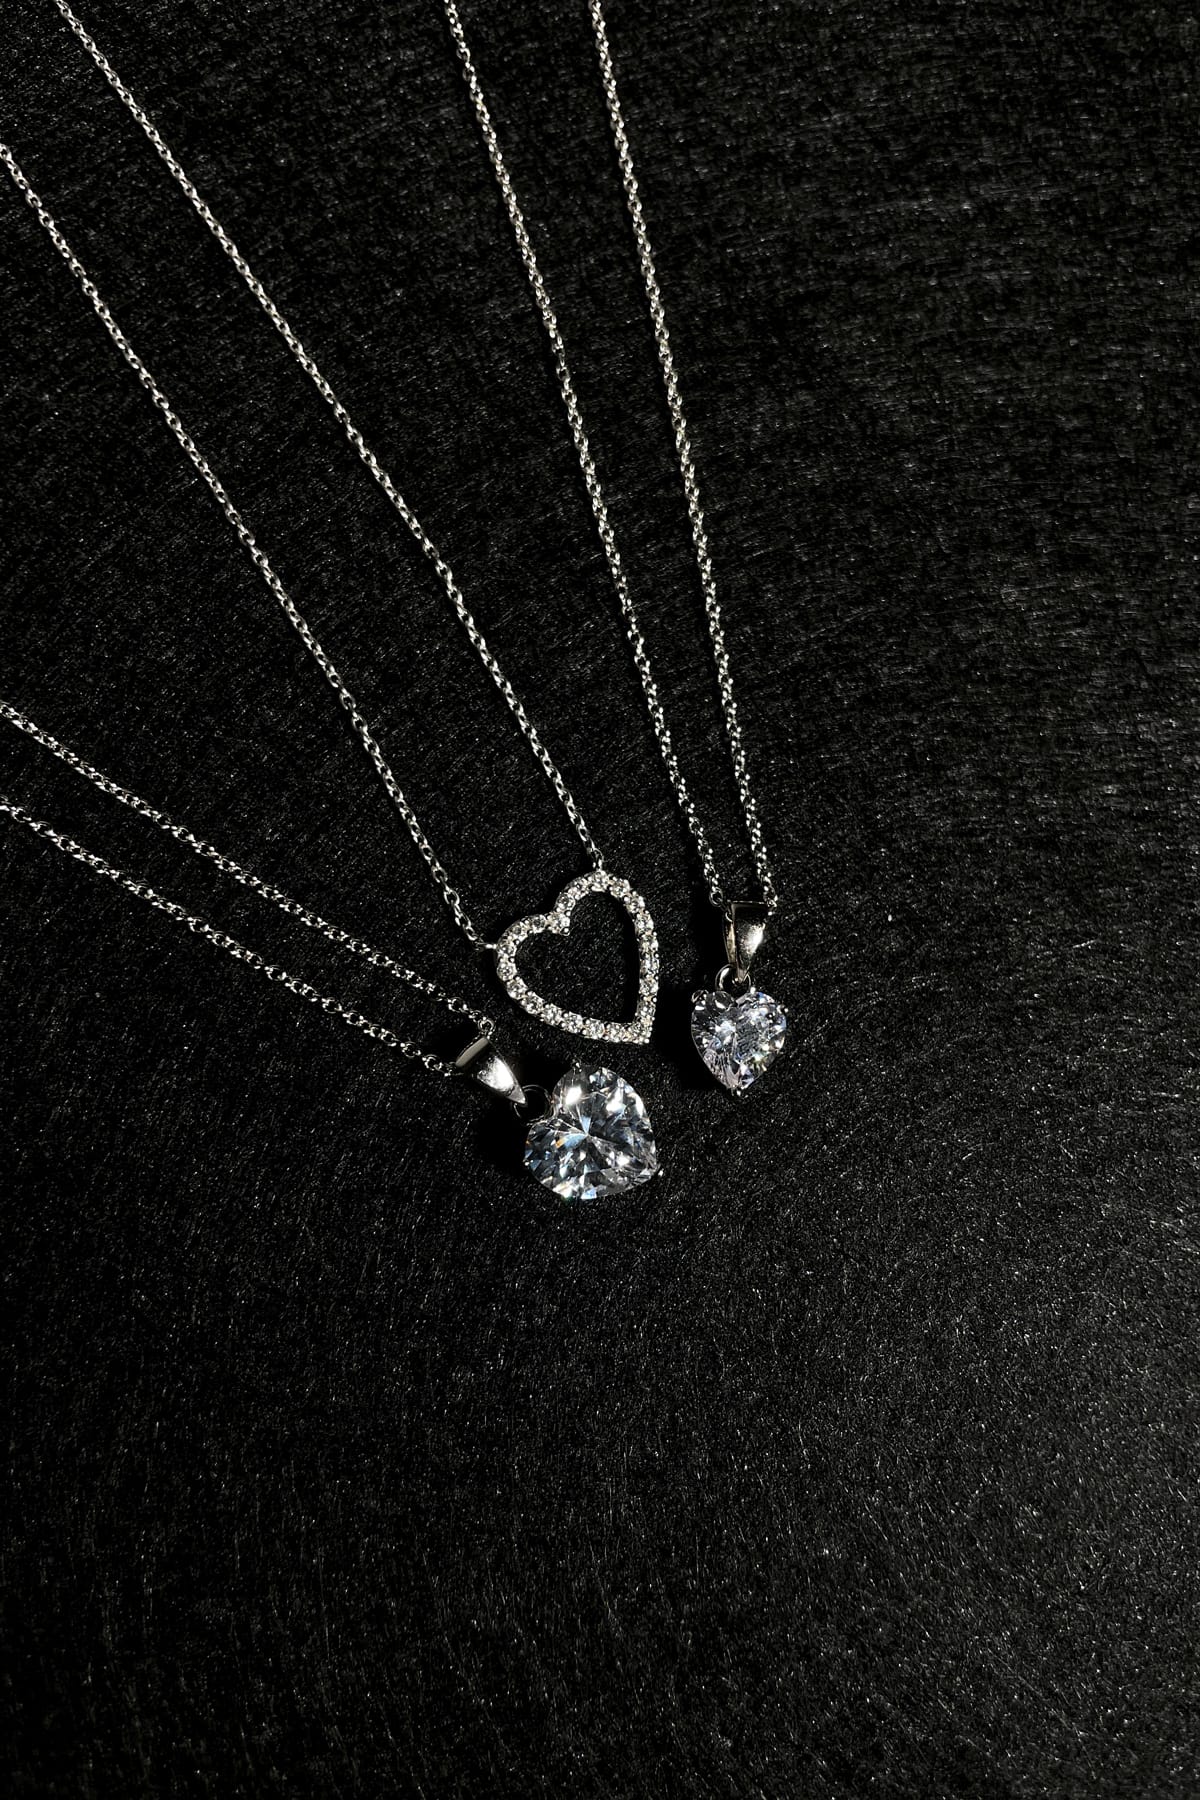 Sterling Silver 9mm Cubic Zirconia Heart Shaped Pendant with Chain available at LeGassick Diamonds and Jewellery Gold Coast, Australia.